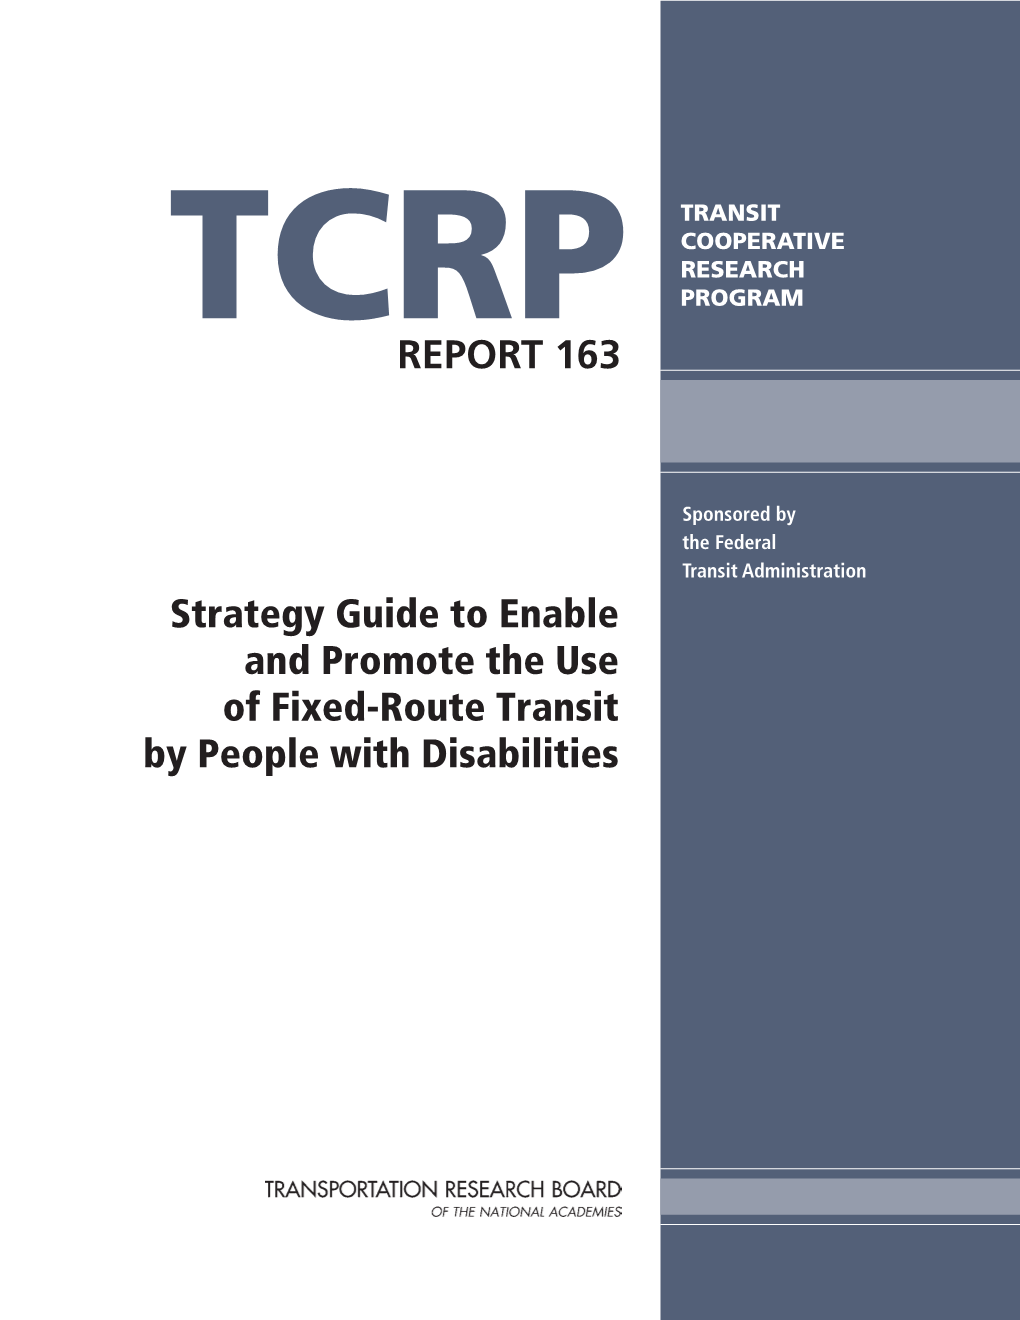 TCRP Report 163 – Strategy Guide to Enable and Promote the Use Of